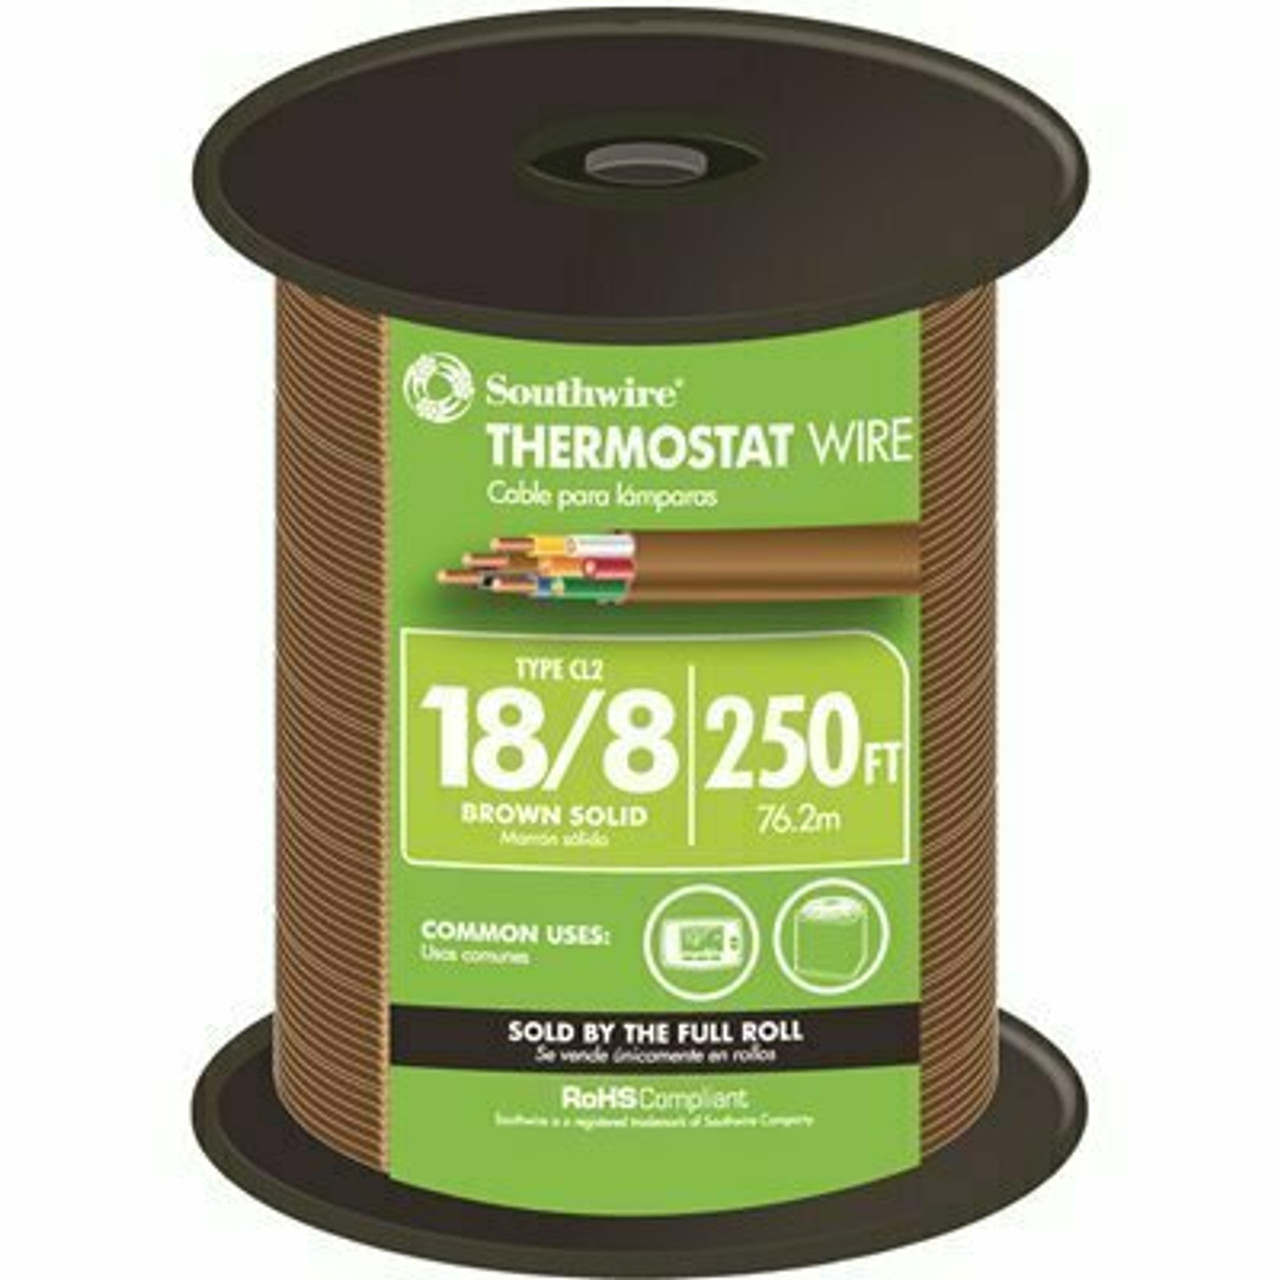 Southwire 250 Ft. 18/8 Brown Solid Cu Cl2 Thermostat Wire